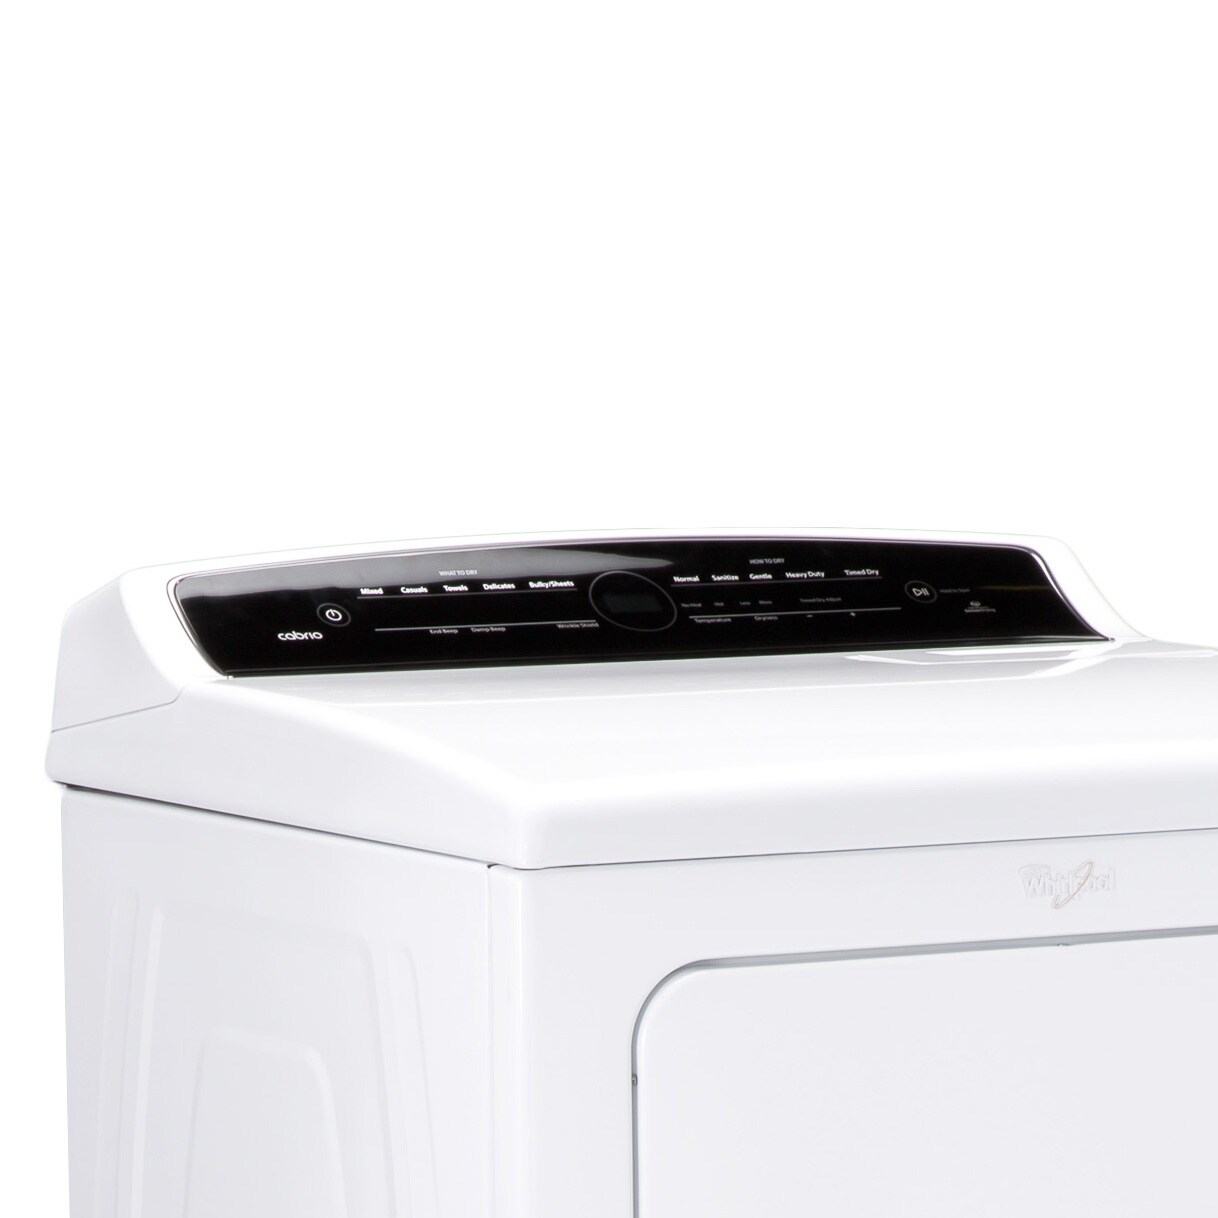 Whirlpool 7-cu ft Electric Dryer with Intuitive Controls in the Electric Dryers at Lowes.com